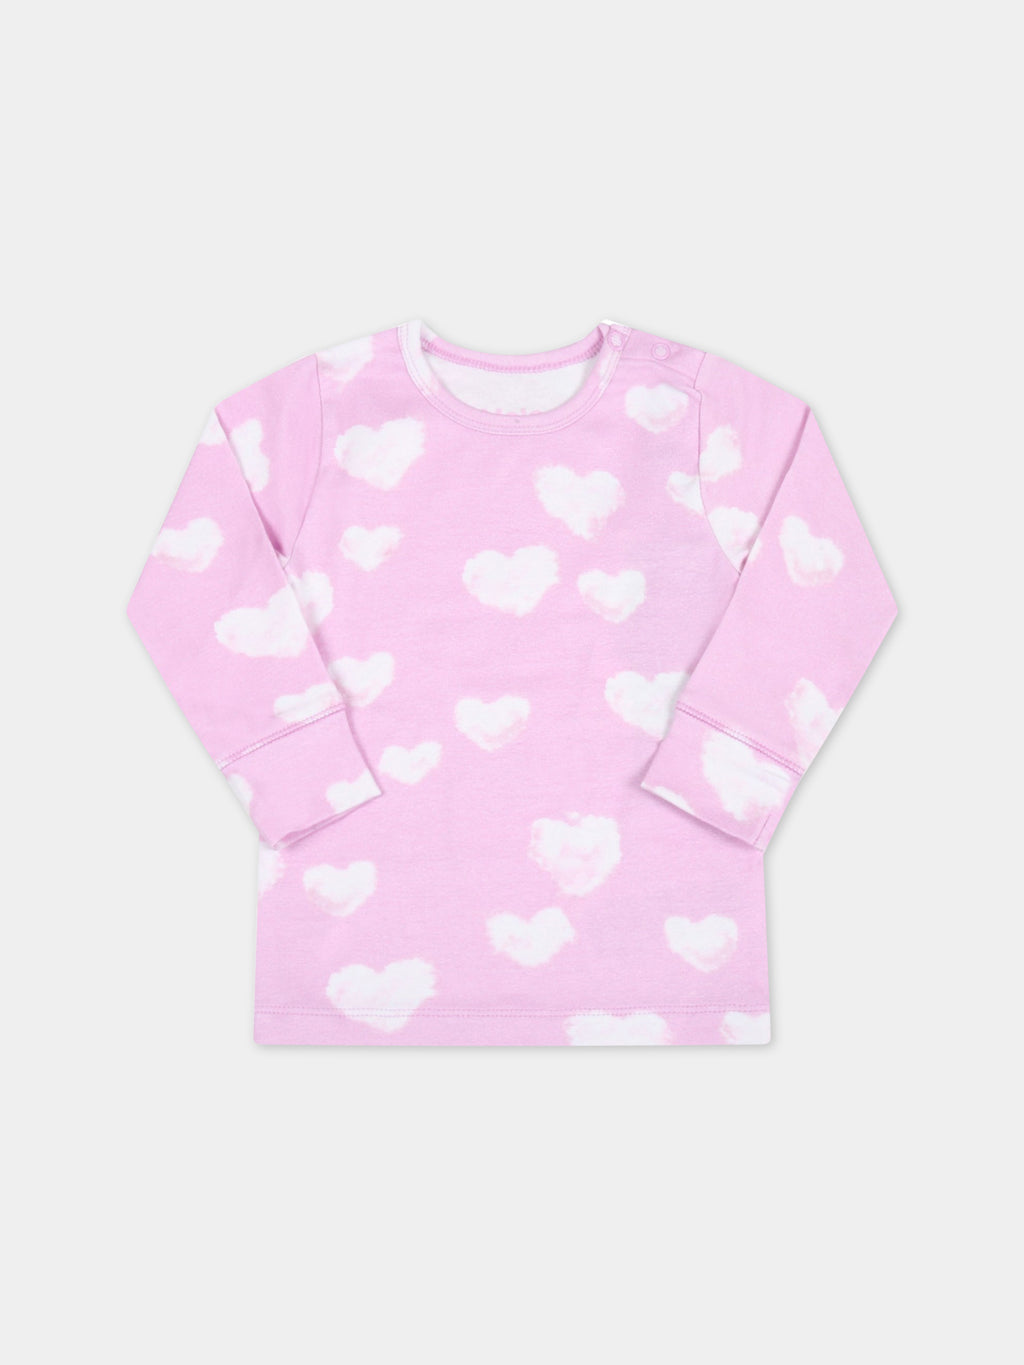 Pink t-shirt for babykids with iconic white clouds